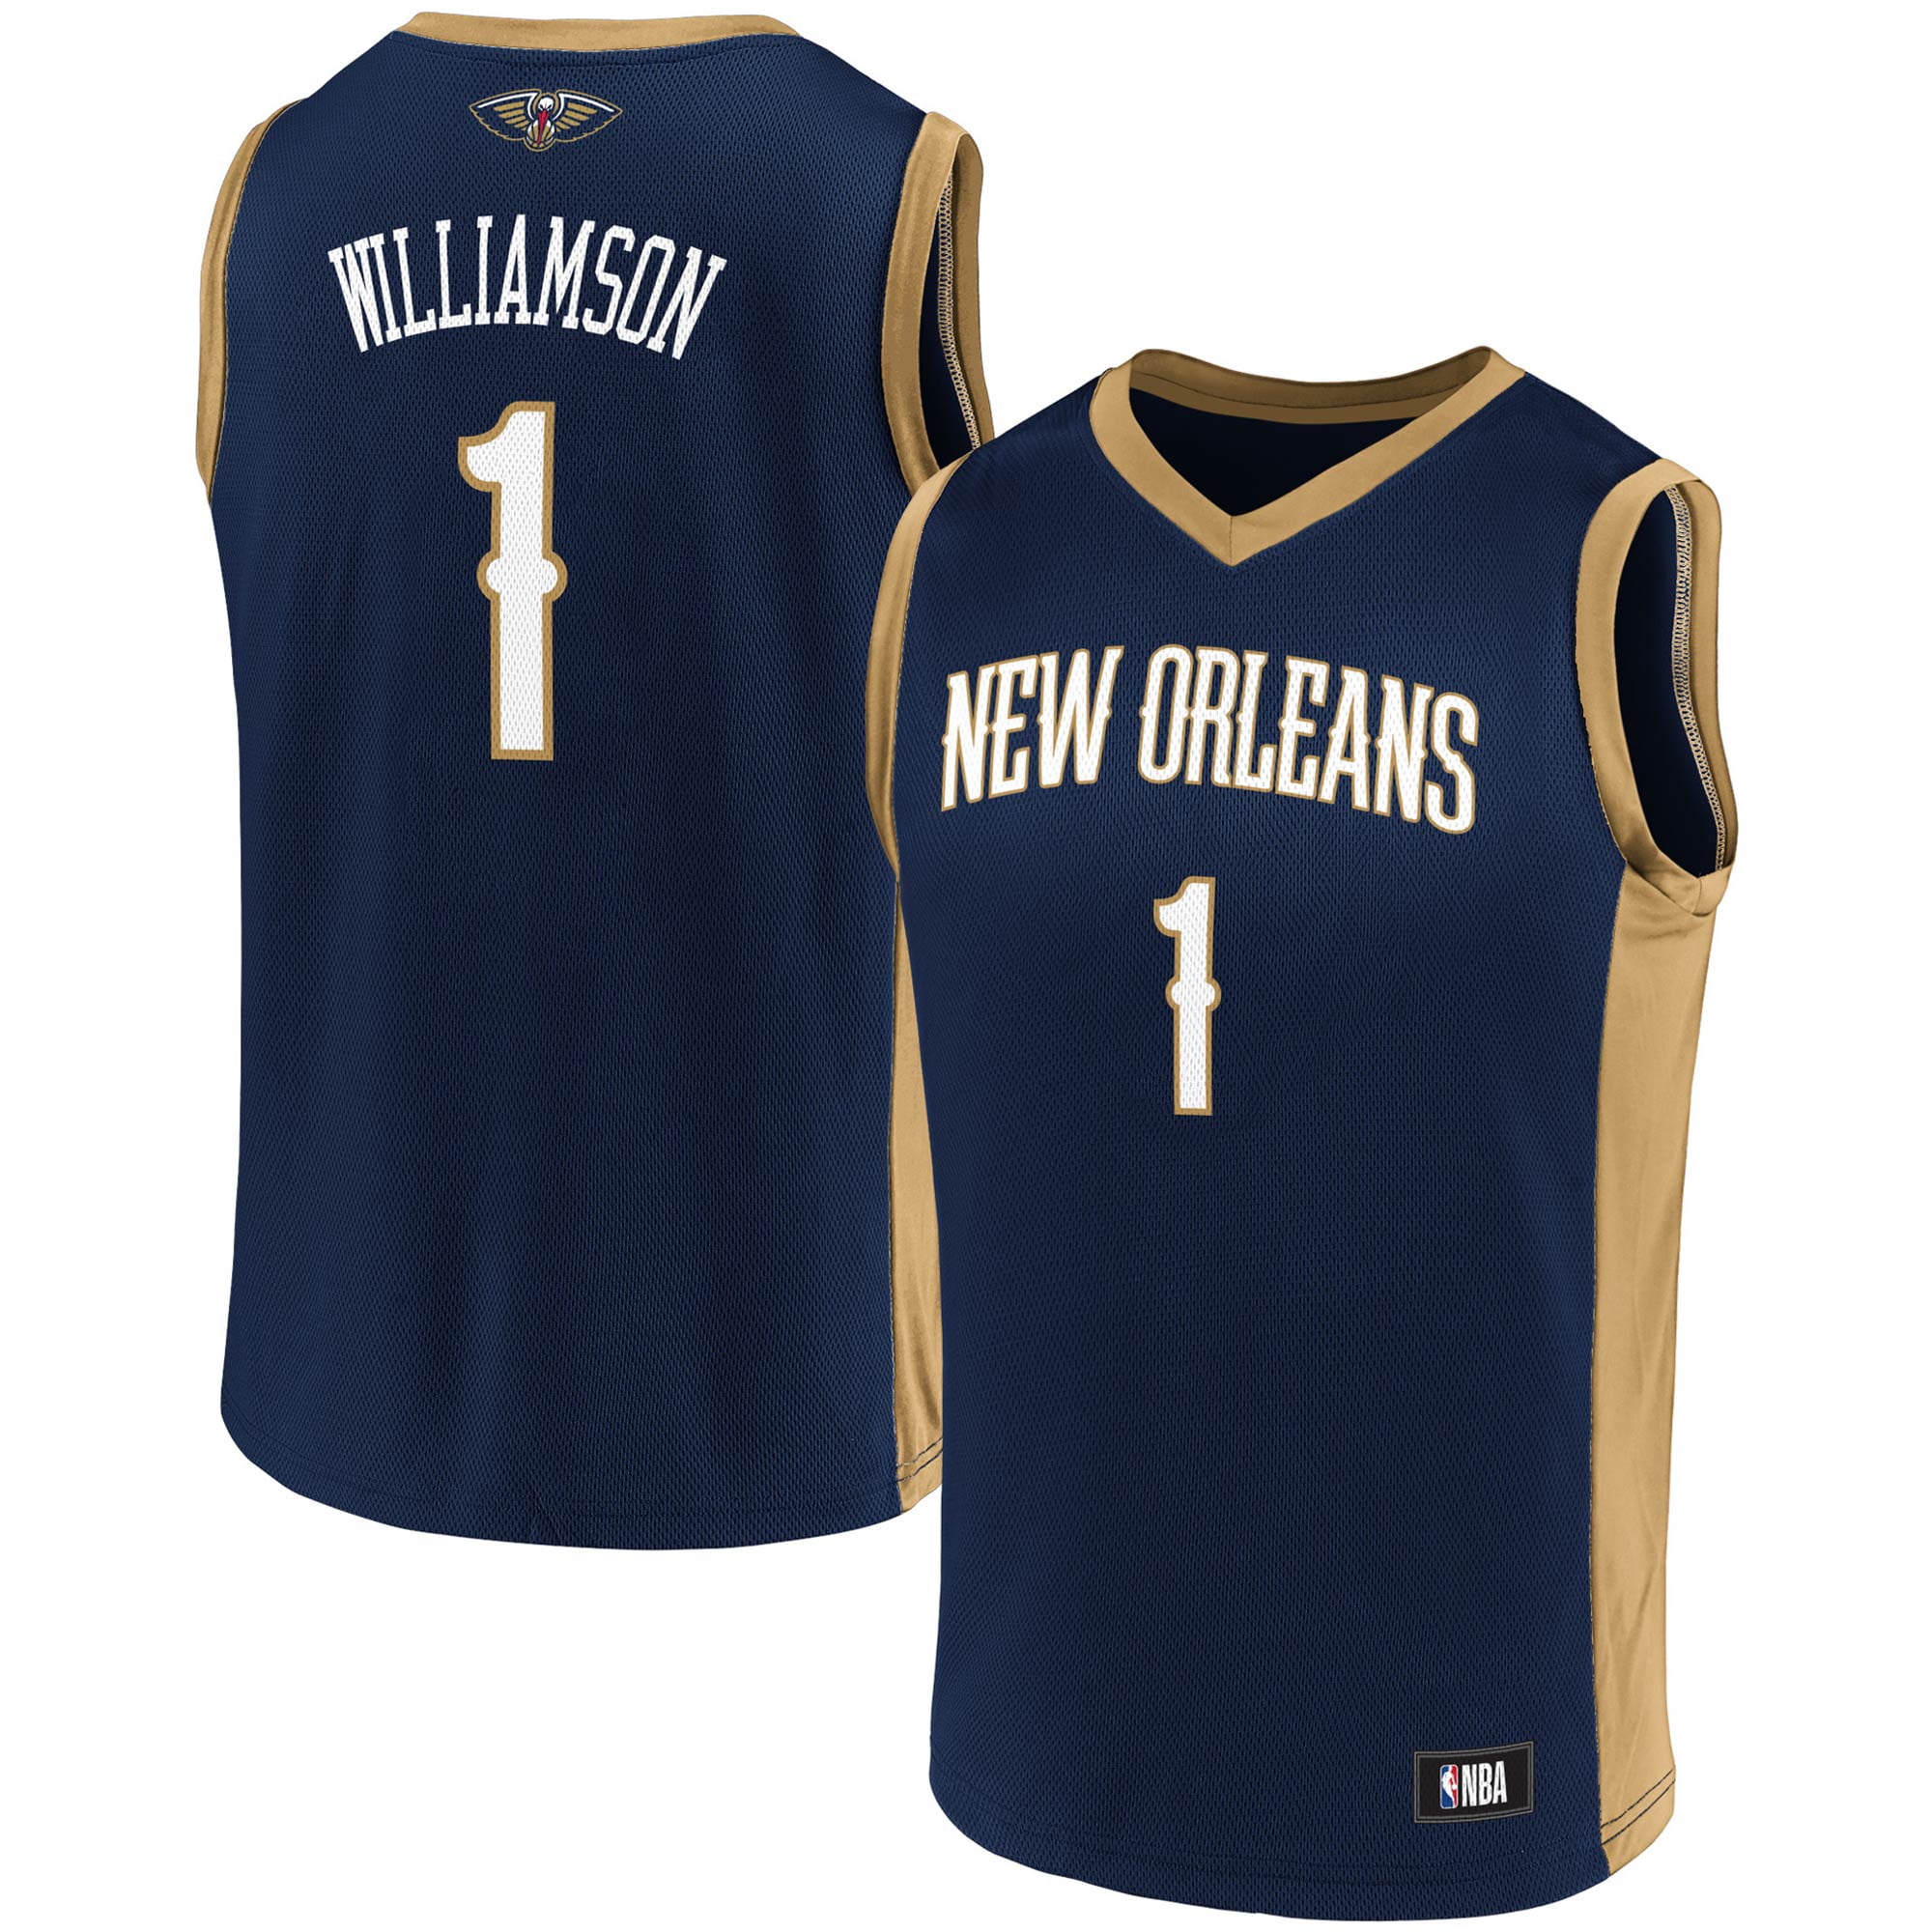 Youth Fanatics Branded Zion Williamson Navy/Gold New Orleans Pelicans ...